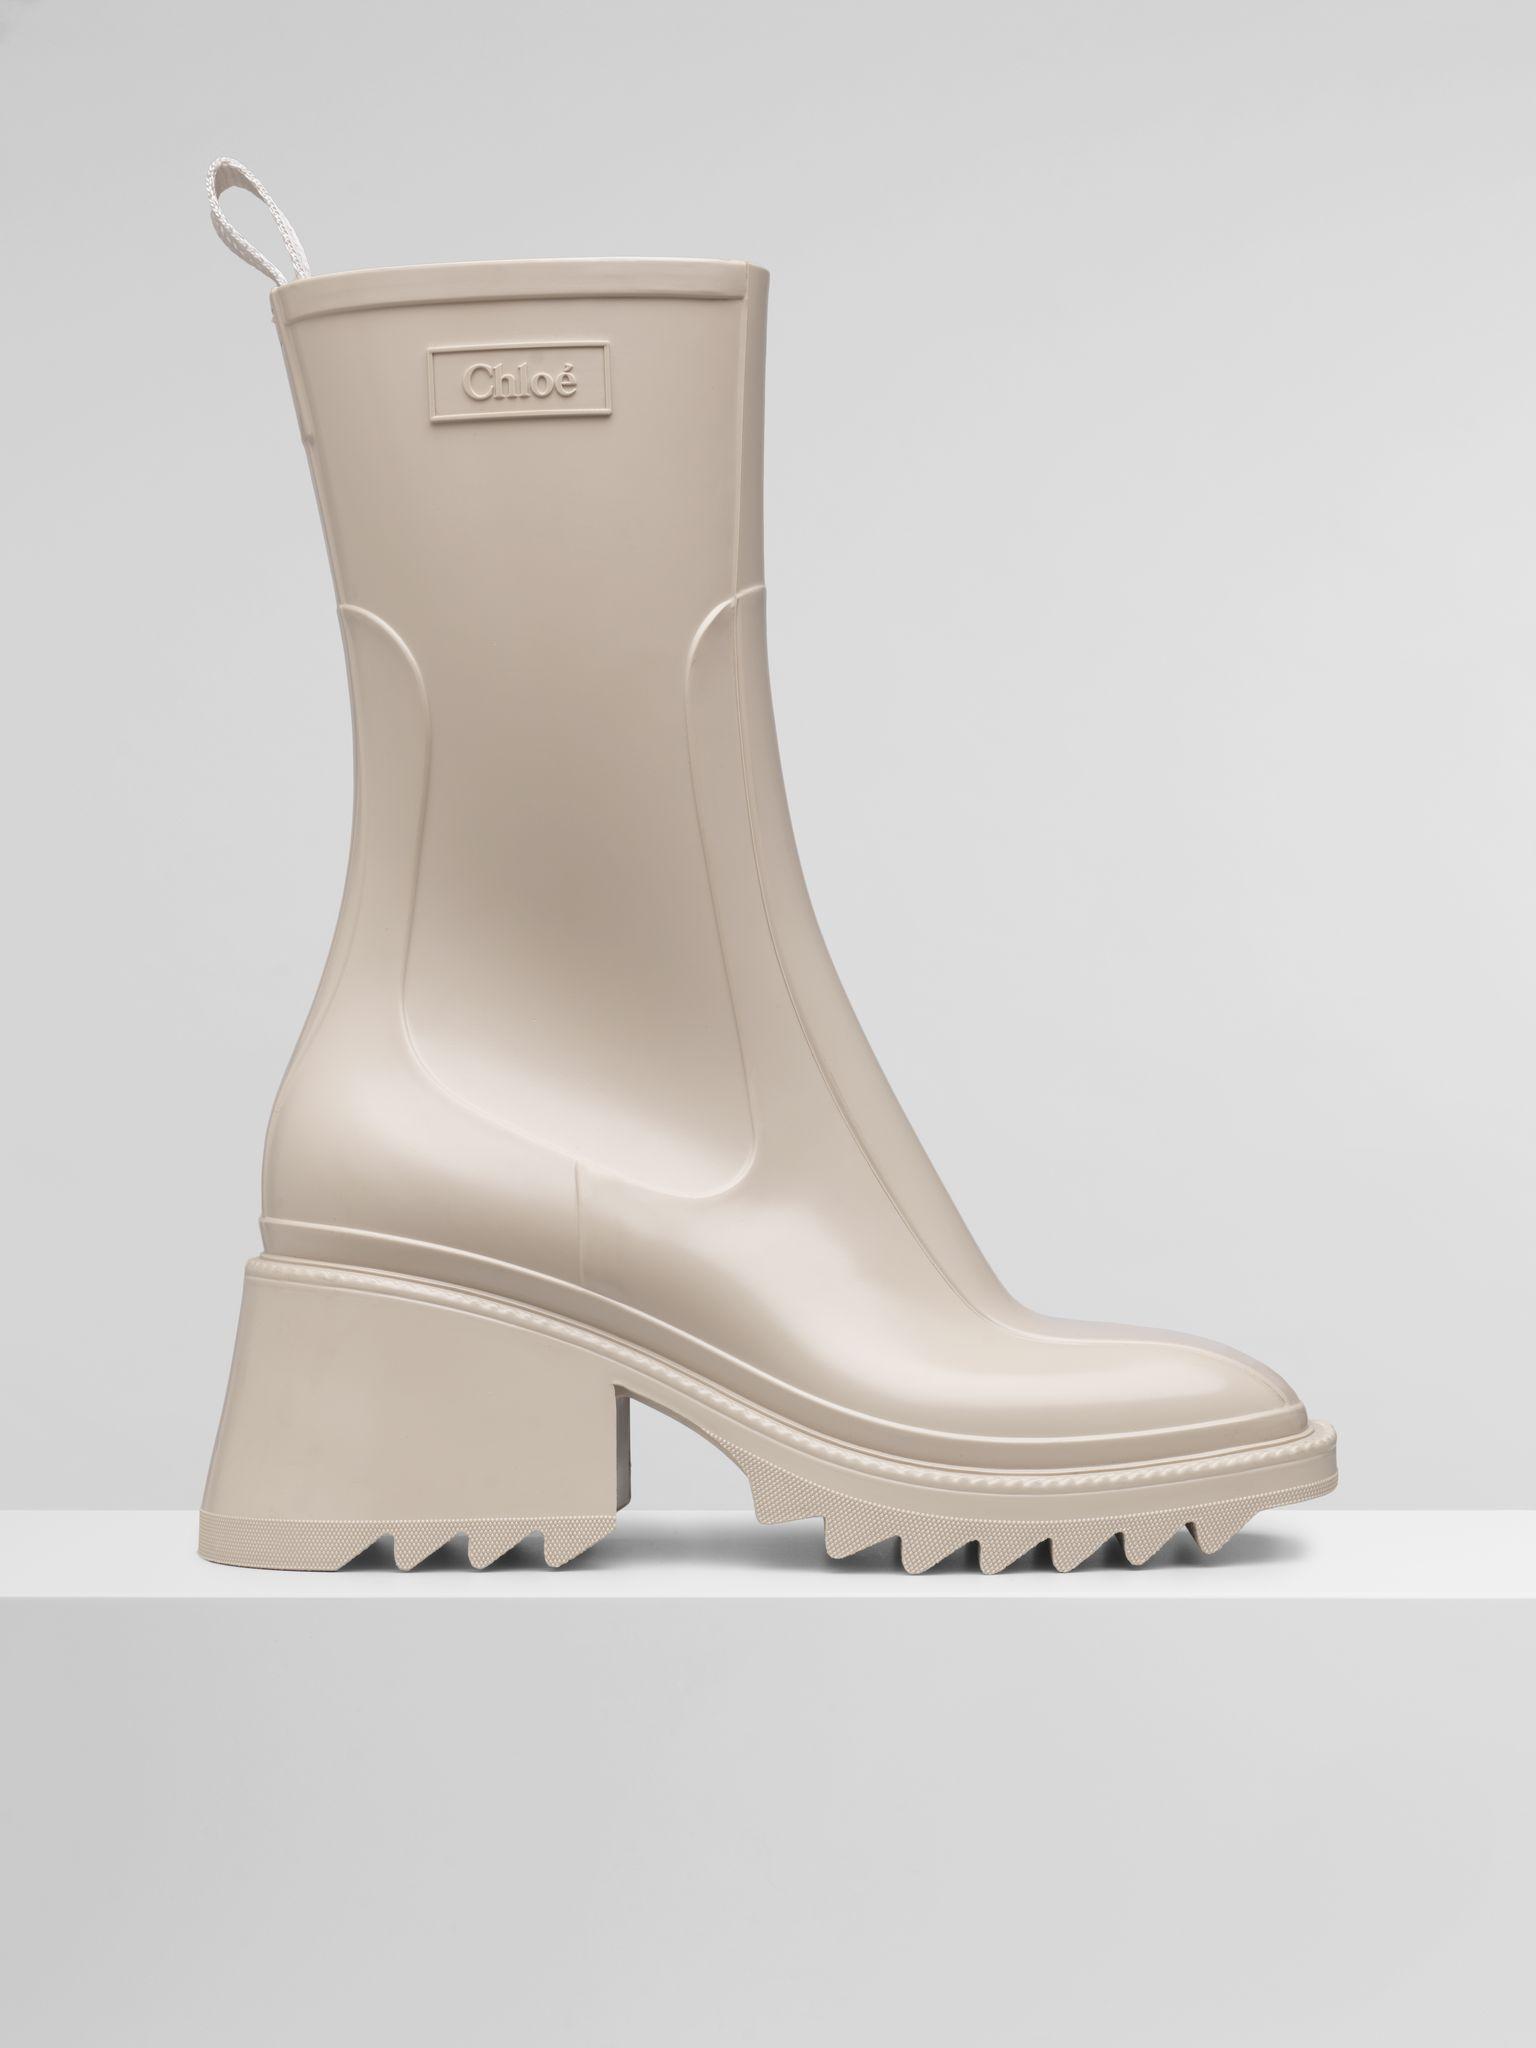 Chloé Leather Betty Rain Boot in Natural - Lyst